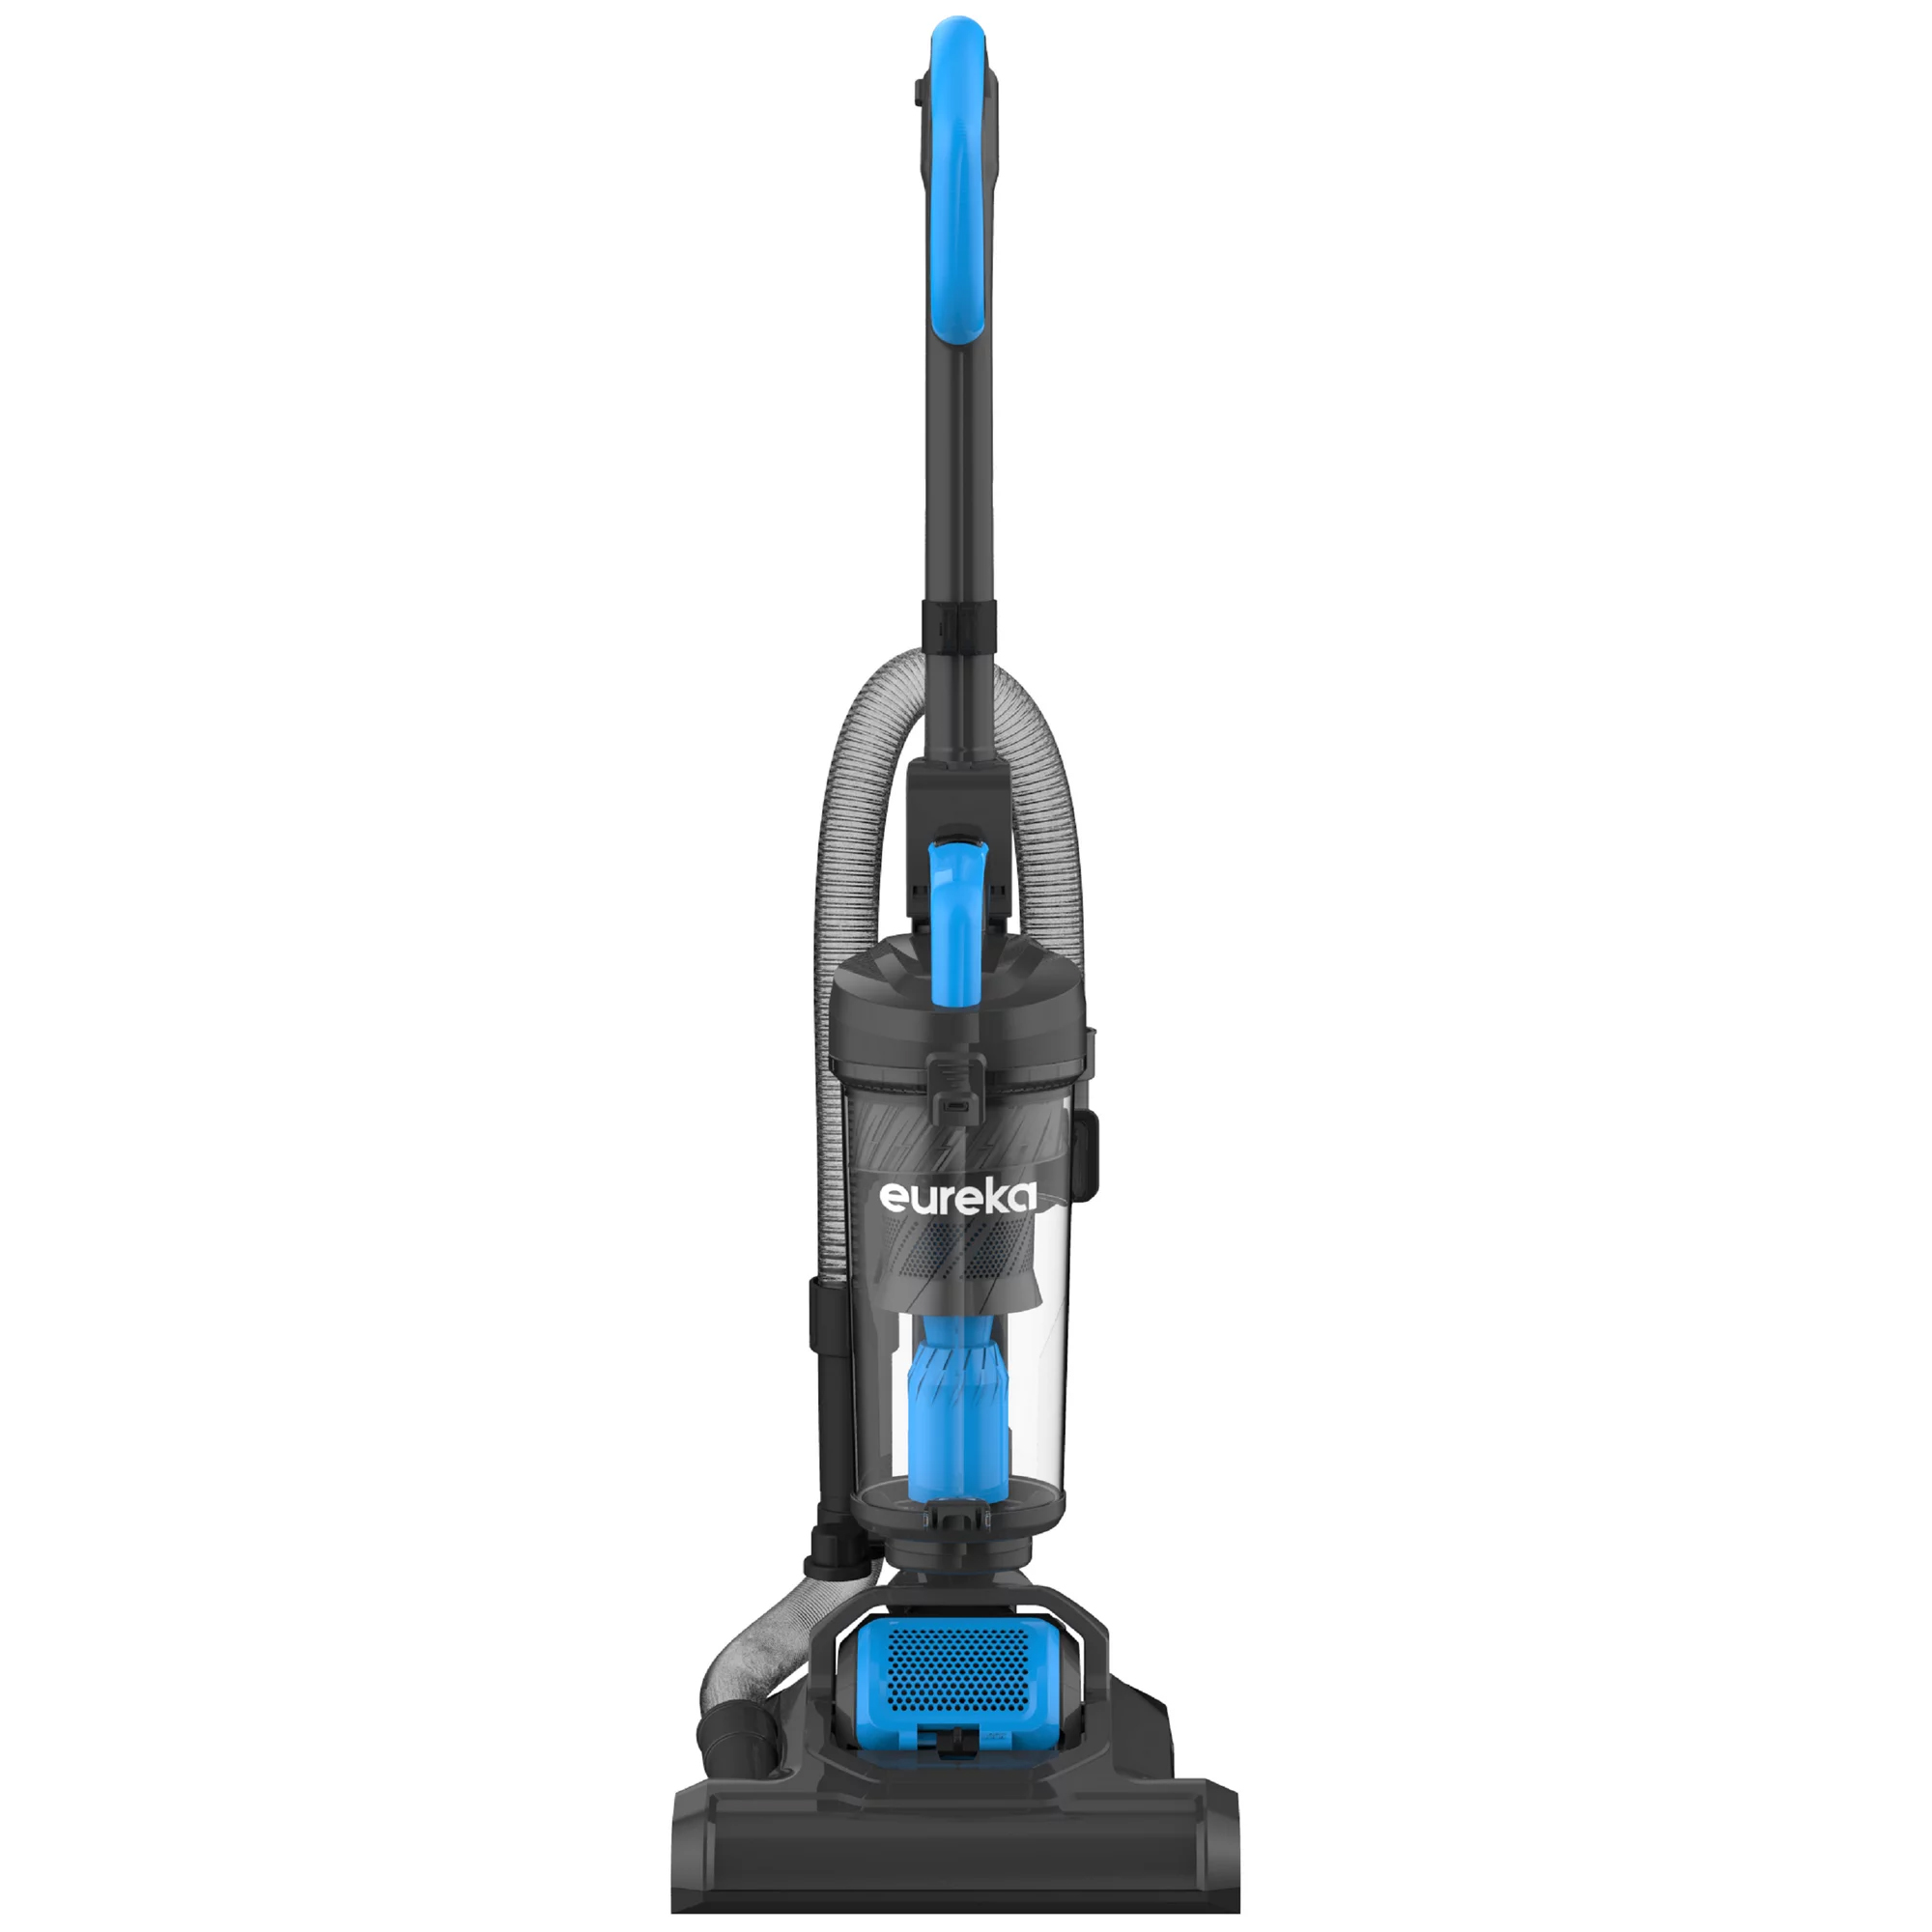 Eureka Max Swivel Deluxe Upright Multi-Surface Vacuum with No Loss of Suction & Swivel Steering, NEU250 - image 3 of 7